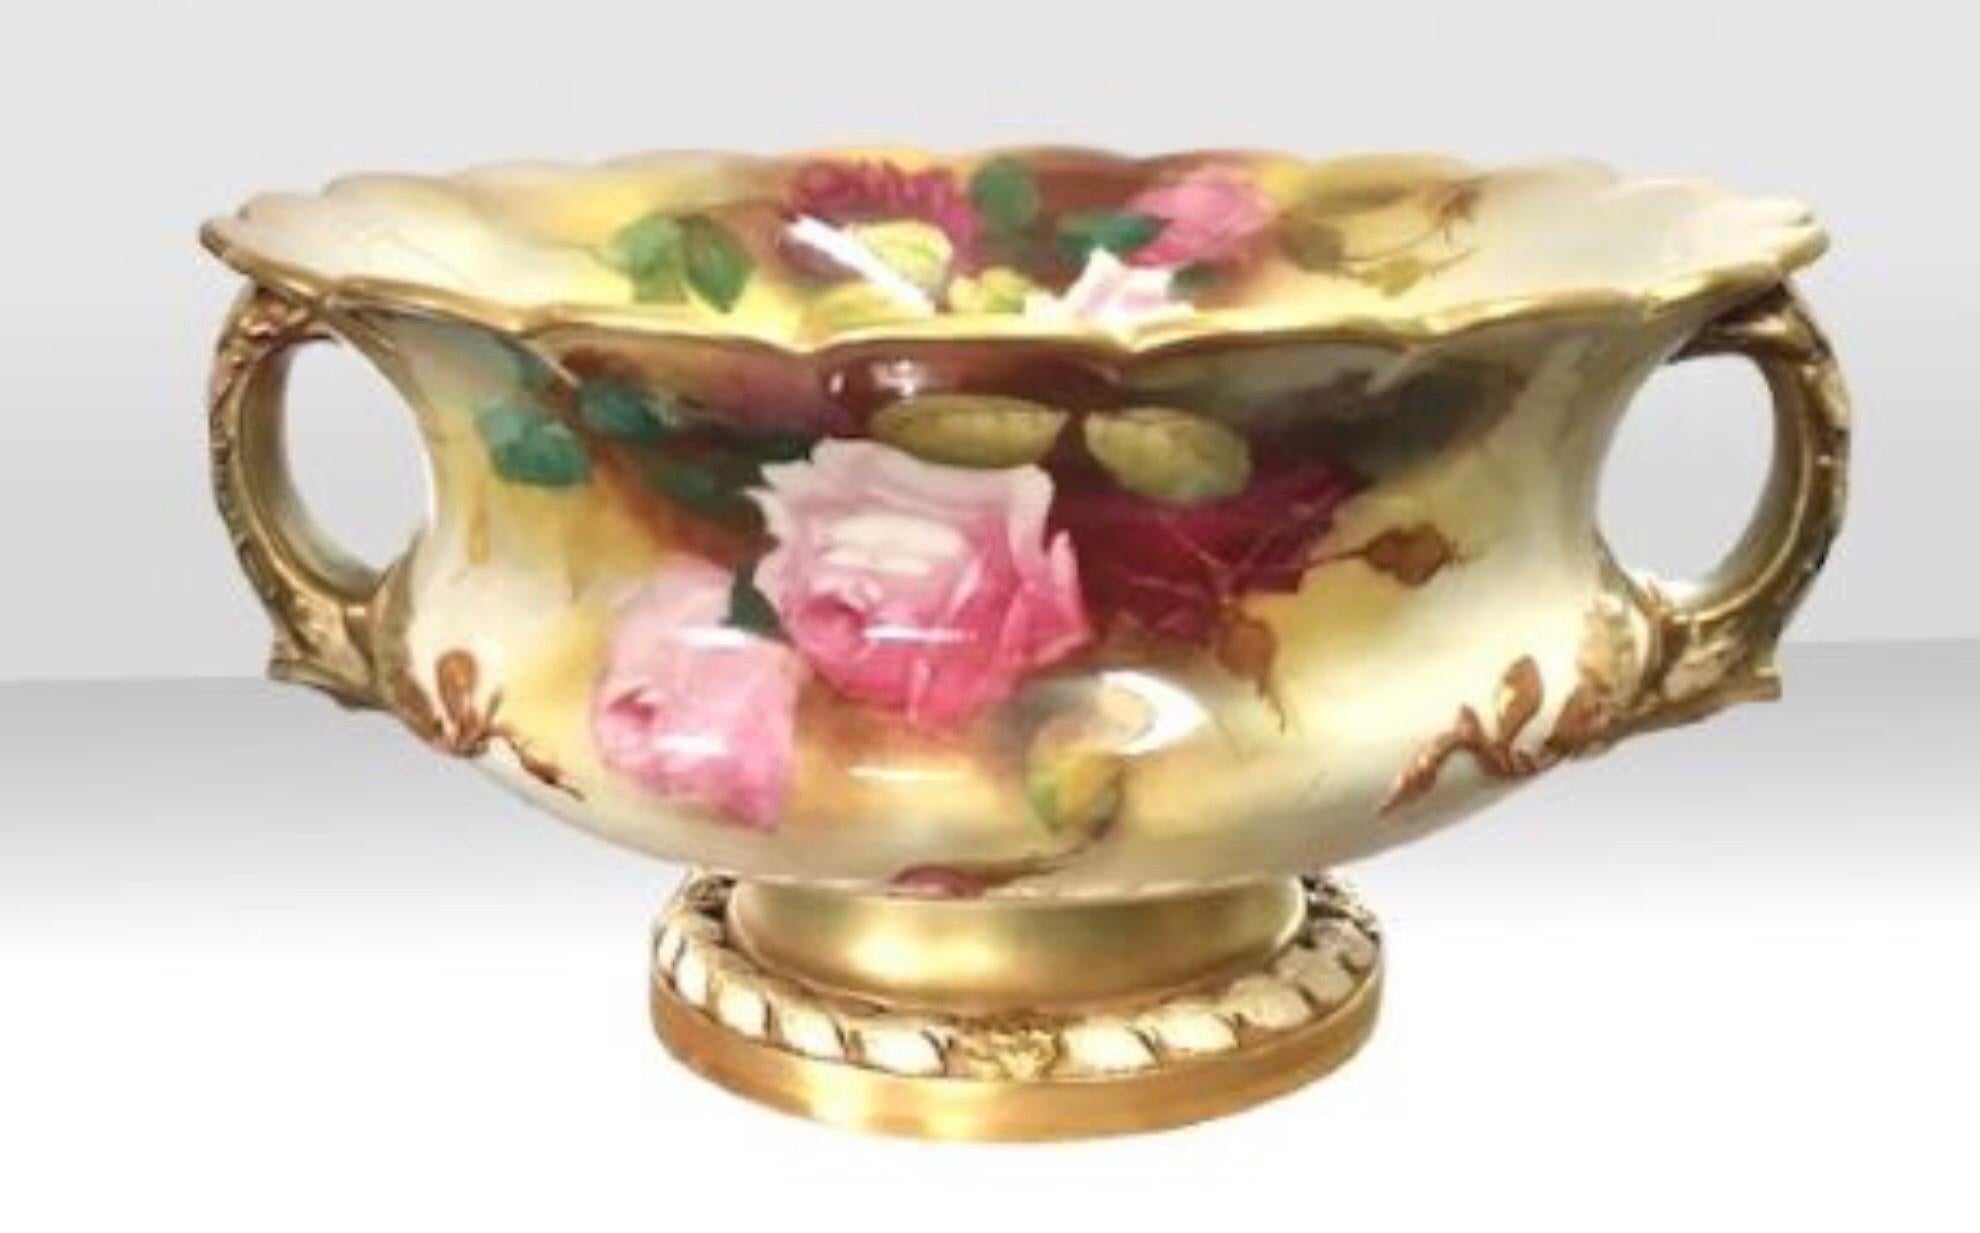 Beautiful Large Antique Royal Worcester Jardiniere bowl vase hand painted with roses and foliage, 
Escalloped Edge,
Dated 1910 
Measures: 26cms x 26cms x 13.5cms
10.25ins x 10.25ins x 5.3ins.